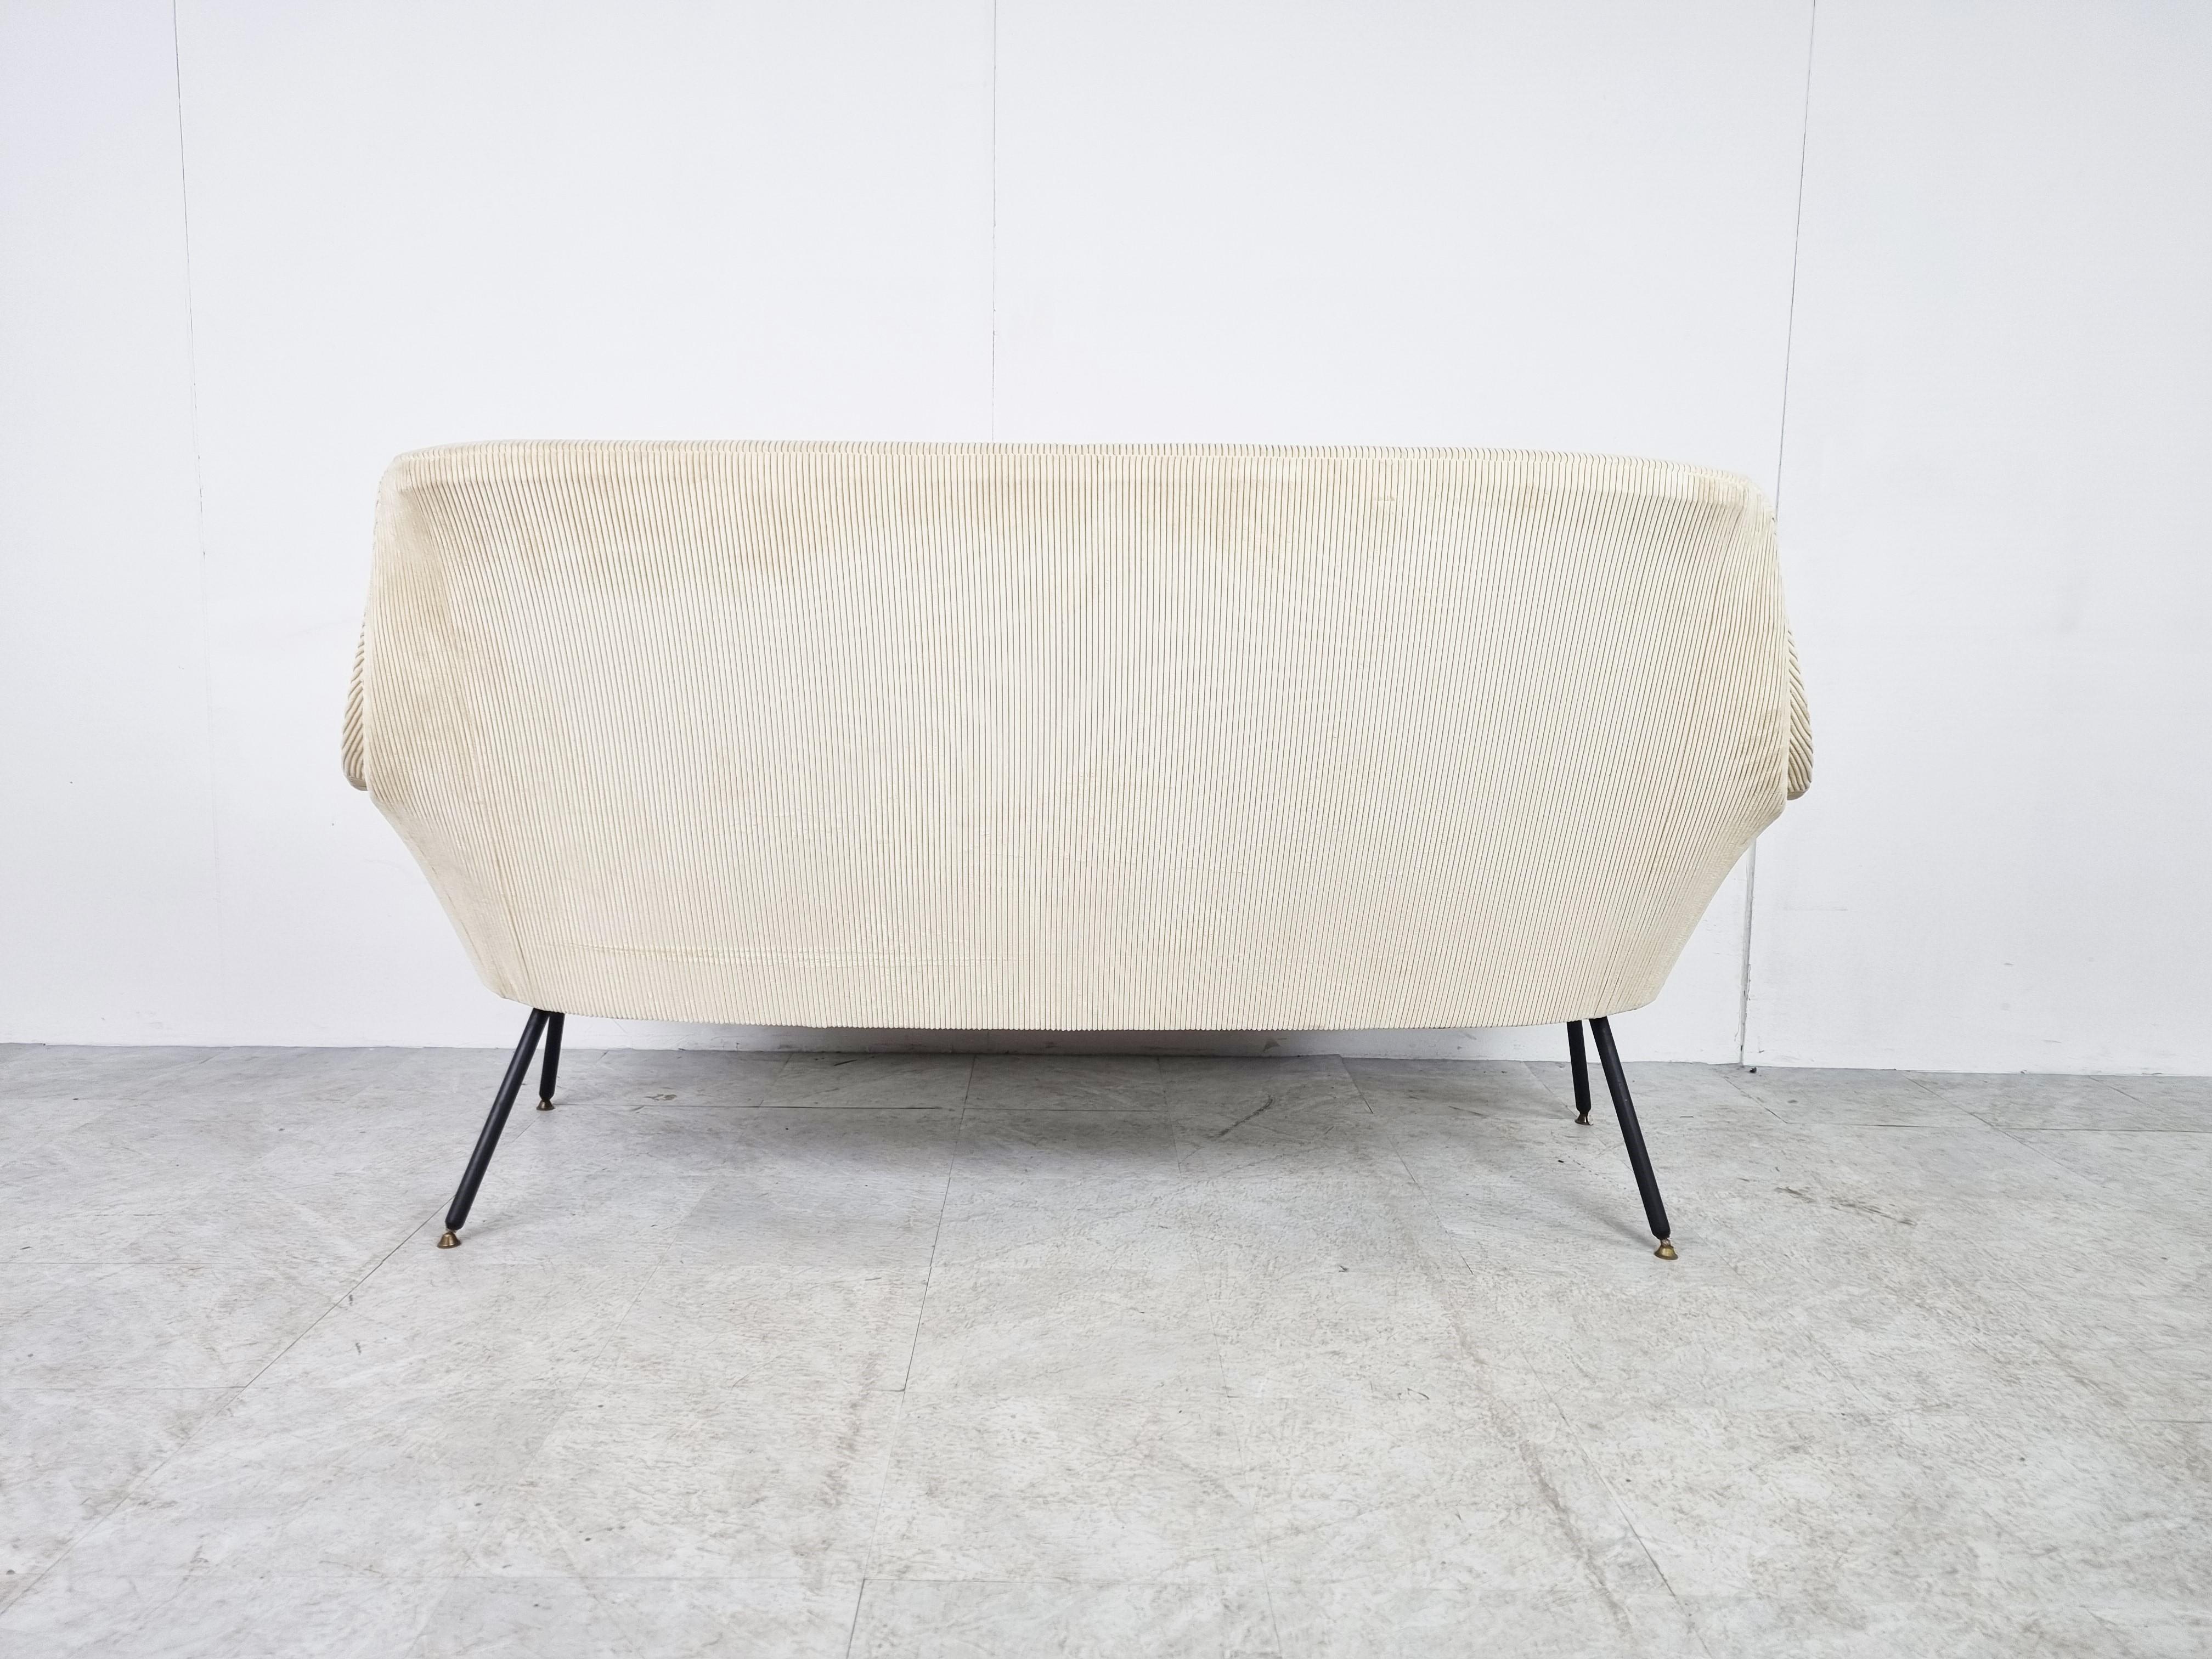 Striking mid century two seater sofa.

It has been reupholstered in white and pink fabric.

Typical and elegant 1950s design.

1950s - Belgium

Very good condition, like new.

Dimensions:
Bench:
Height: 88cm/34.64